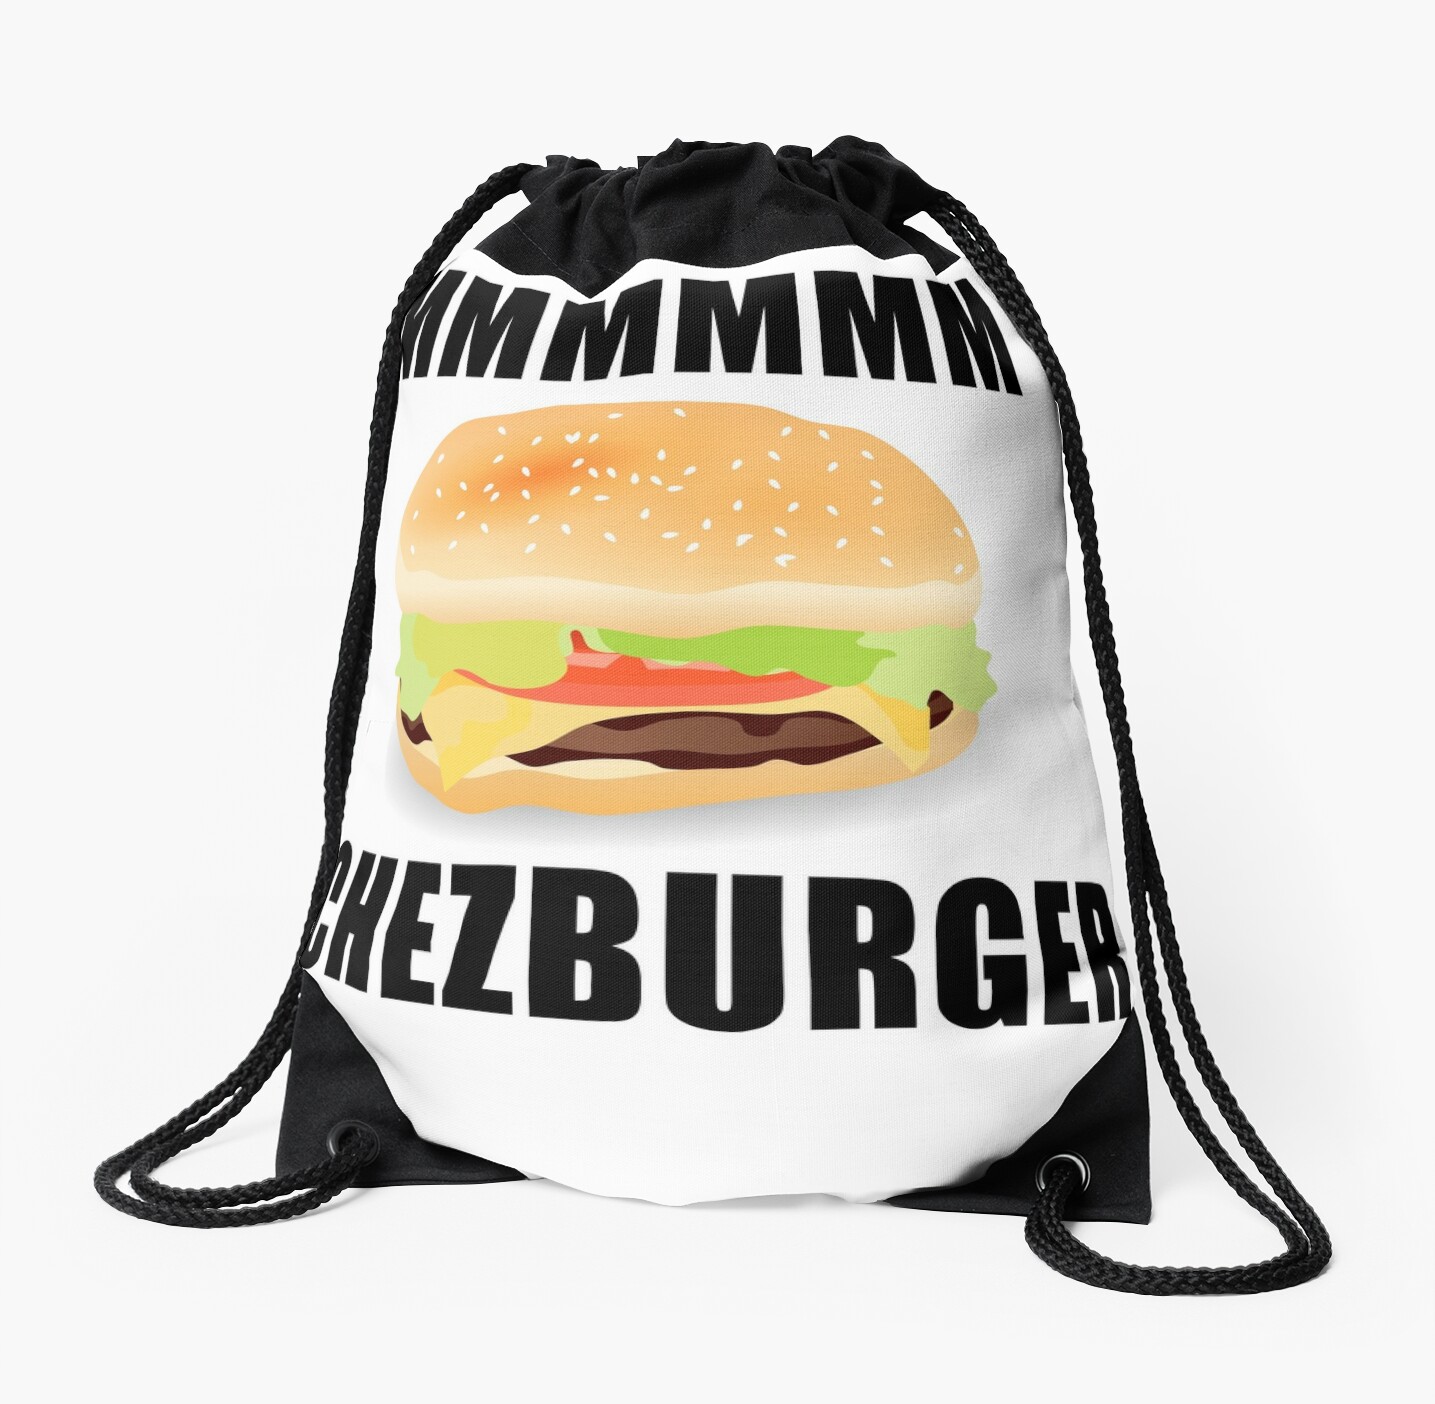 Roblox Mmm Chezburger Drawstring Bag By Jenr8d Designs Redbubble - roblox get eaten by the noob drawstring bag by jenr8d designs